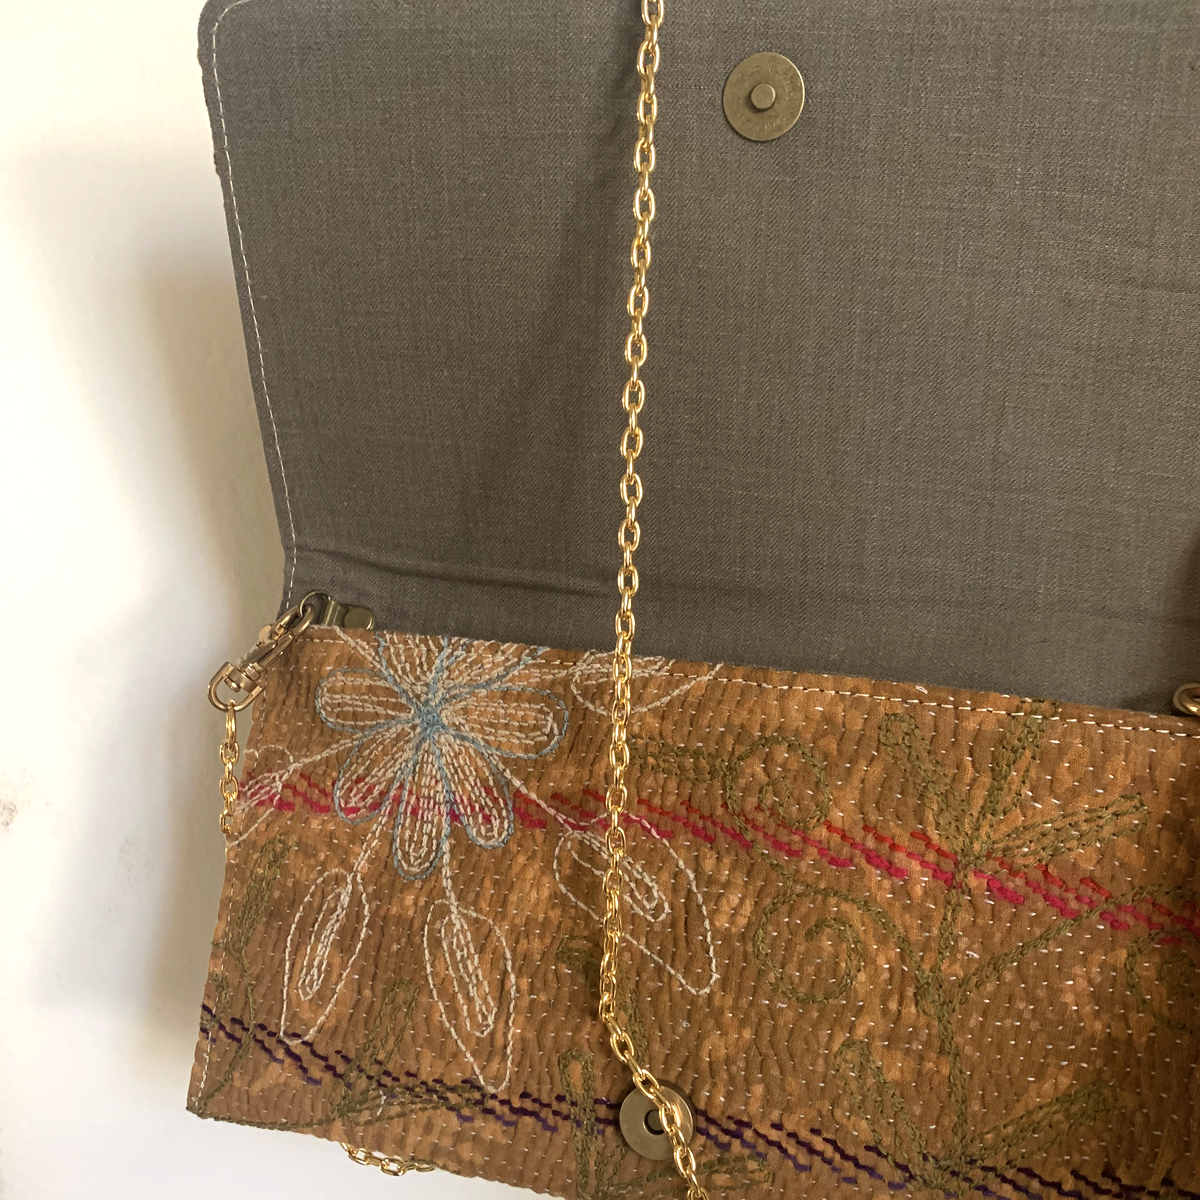 Upcycled Vintage Kantha Clutch with Bordeaux Embroidered Bouquet